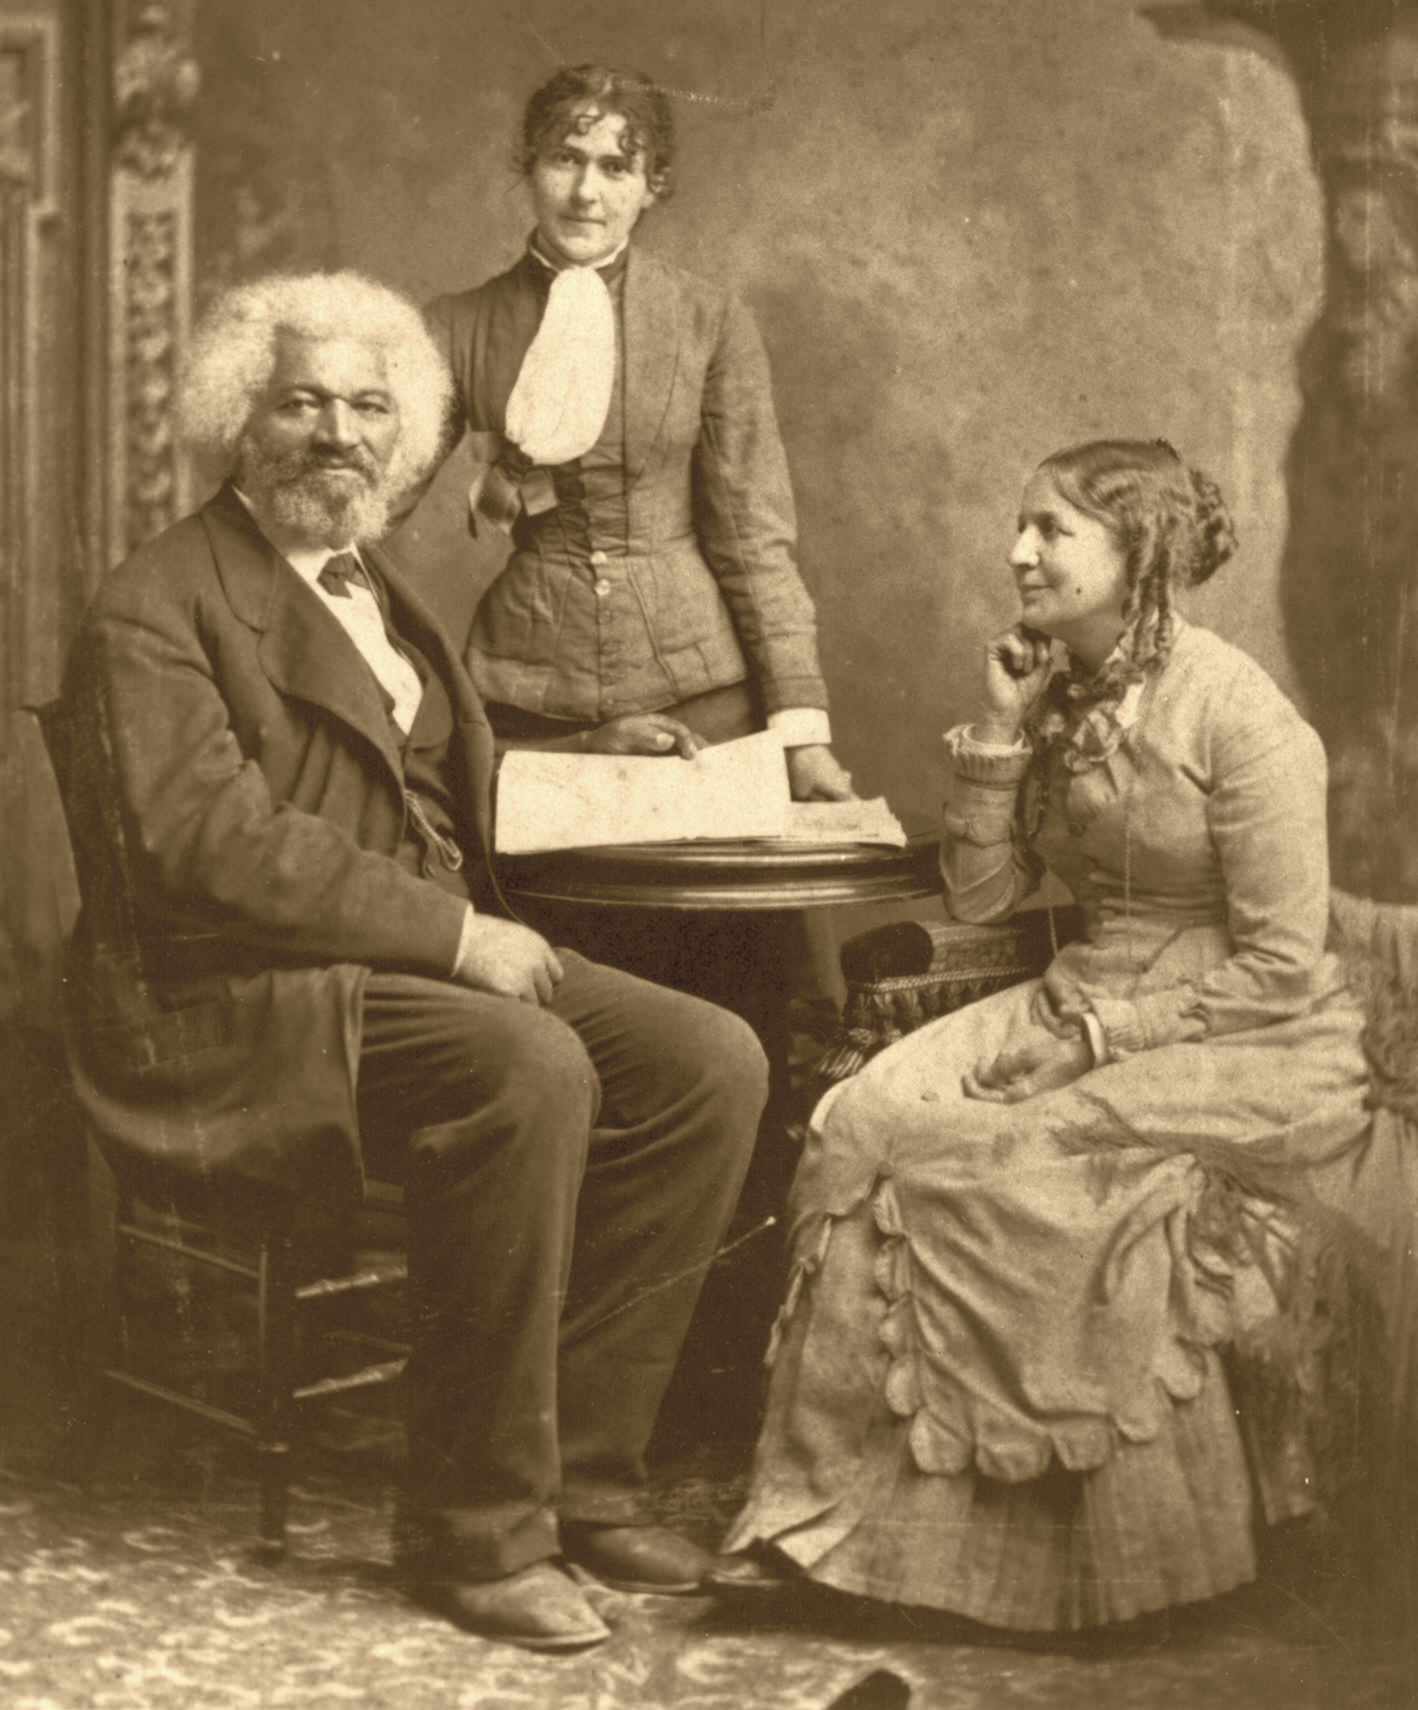 Frederick Douglass after 1884 with his second wife Helen Pitts Douglass (sitting). The woman standing is her sister Eva Pitts.